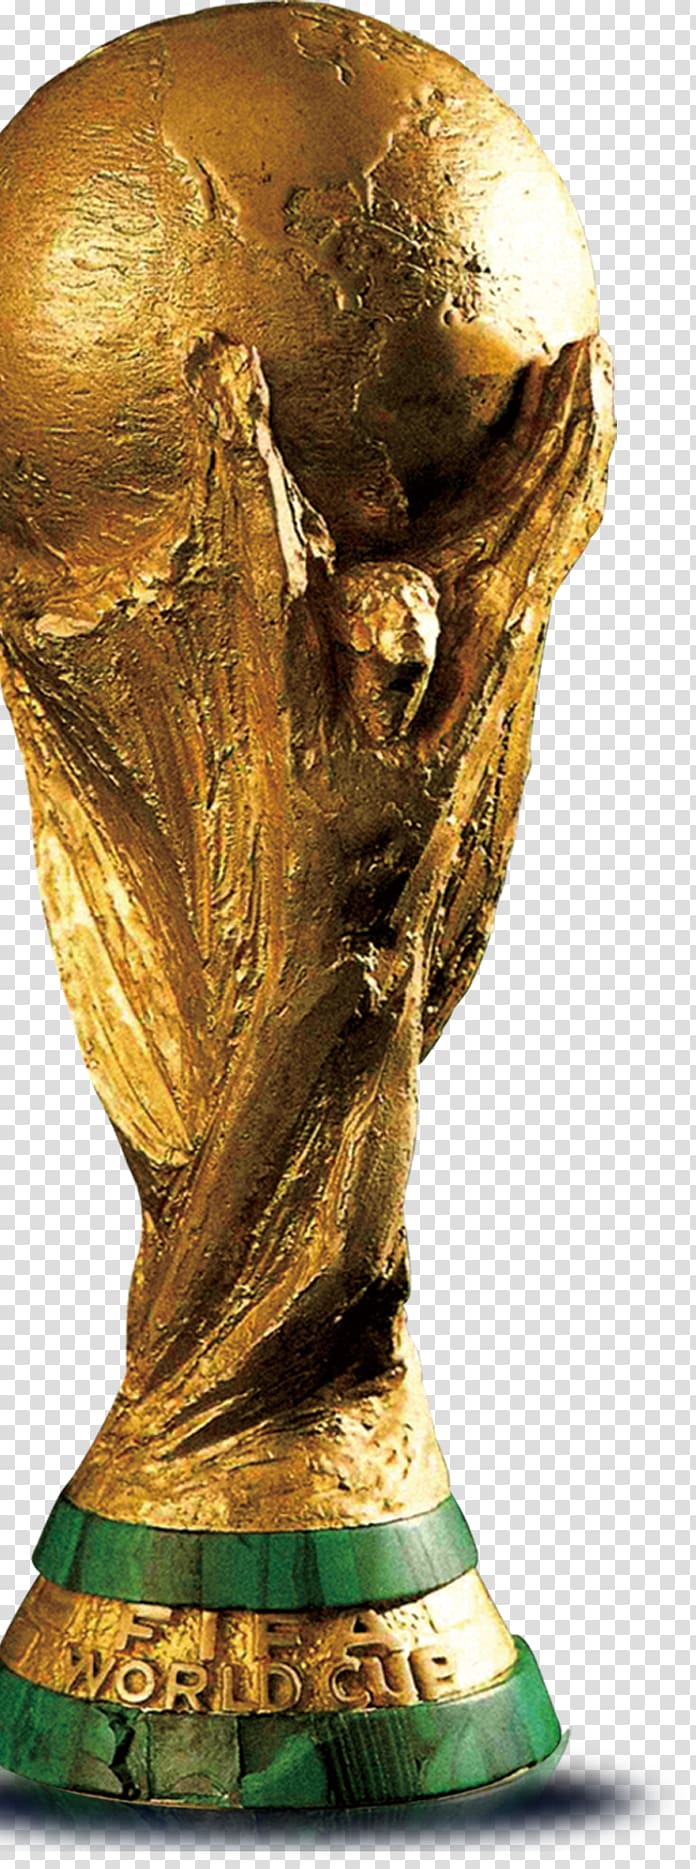 gold statue, 2014 FIFA World Cup 2018 FIFA World Cup FIFA World Cup Trophy Brazil national football team, European Cup,World Cup transparent background PNG clipart